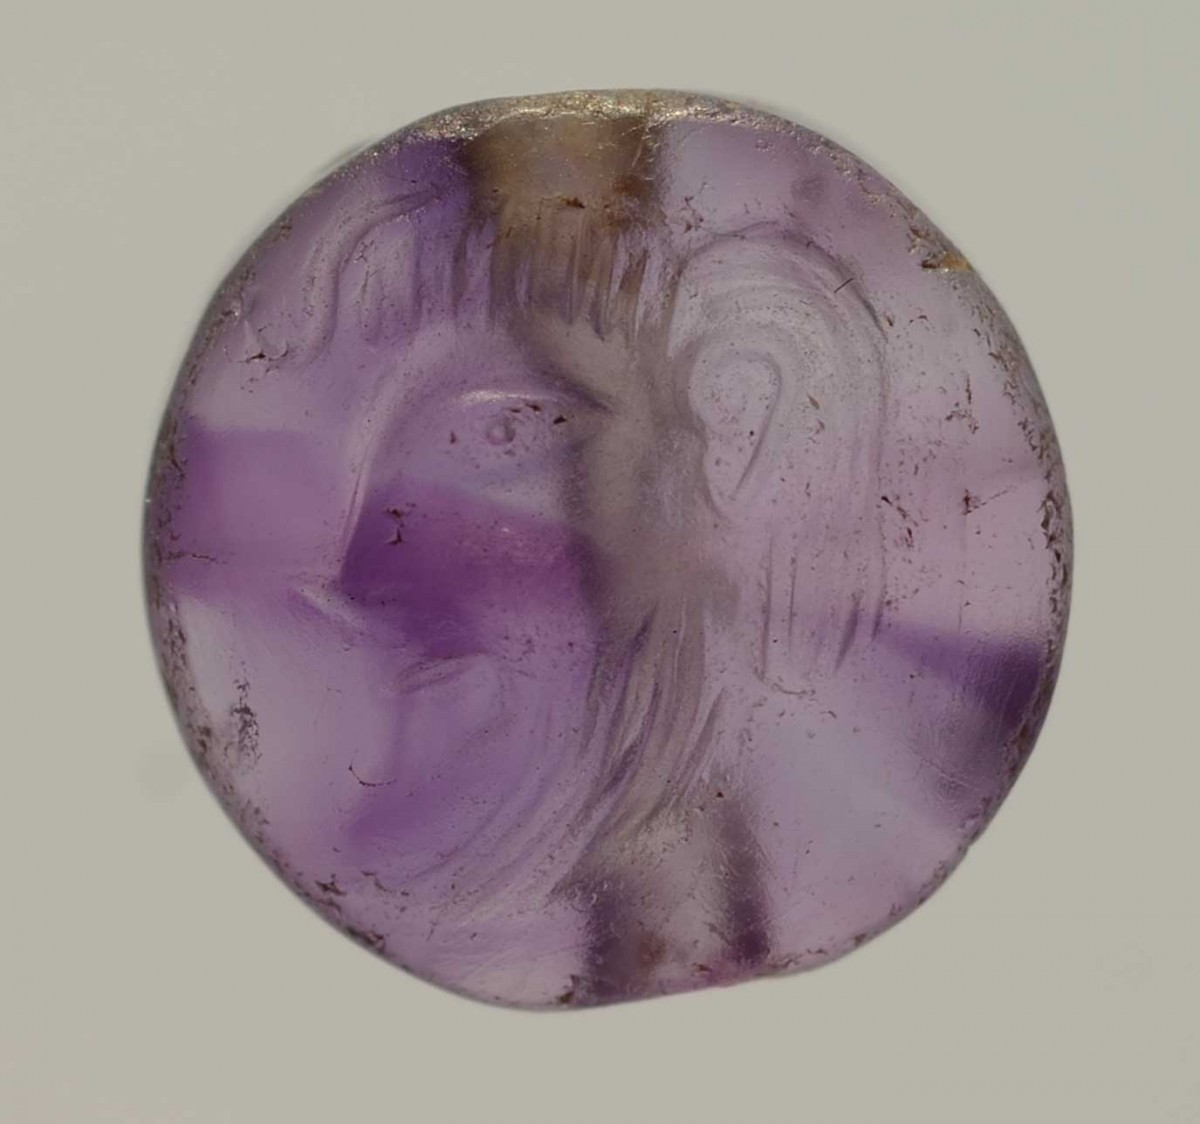 Seal stone made of amethyst depicting a male figure, from Grave C  of the Grave Circle B of Mycenae. 17th-16th c. BC. Mycenaean Antiquities exhibition, Room 4, display case M16, NAM 8708). (Credit: National Archaeological Museum/Eleftherios A. Galanopoulos)